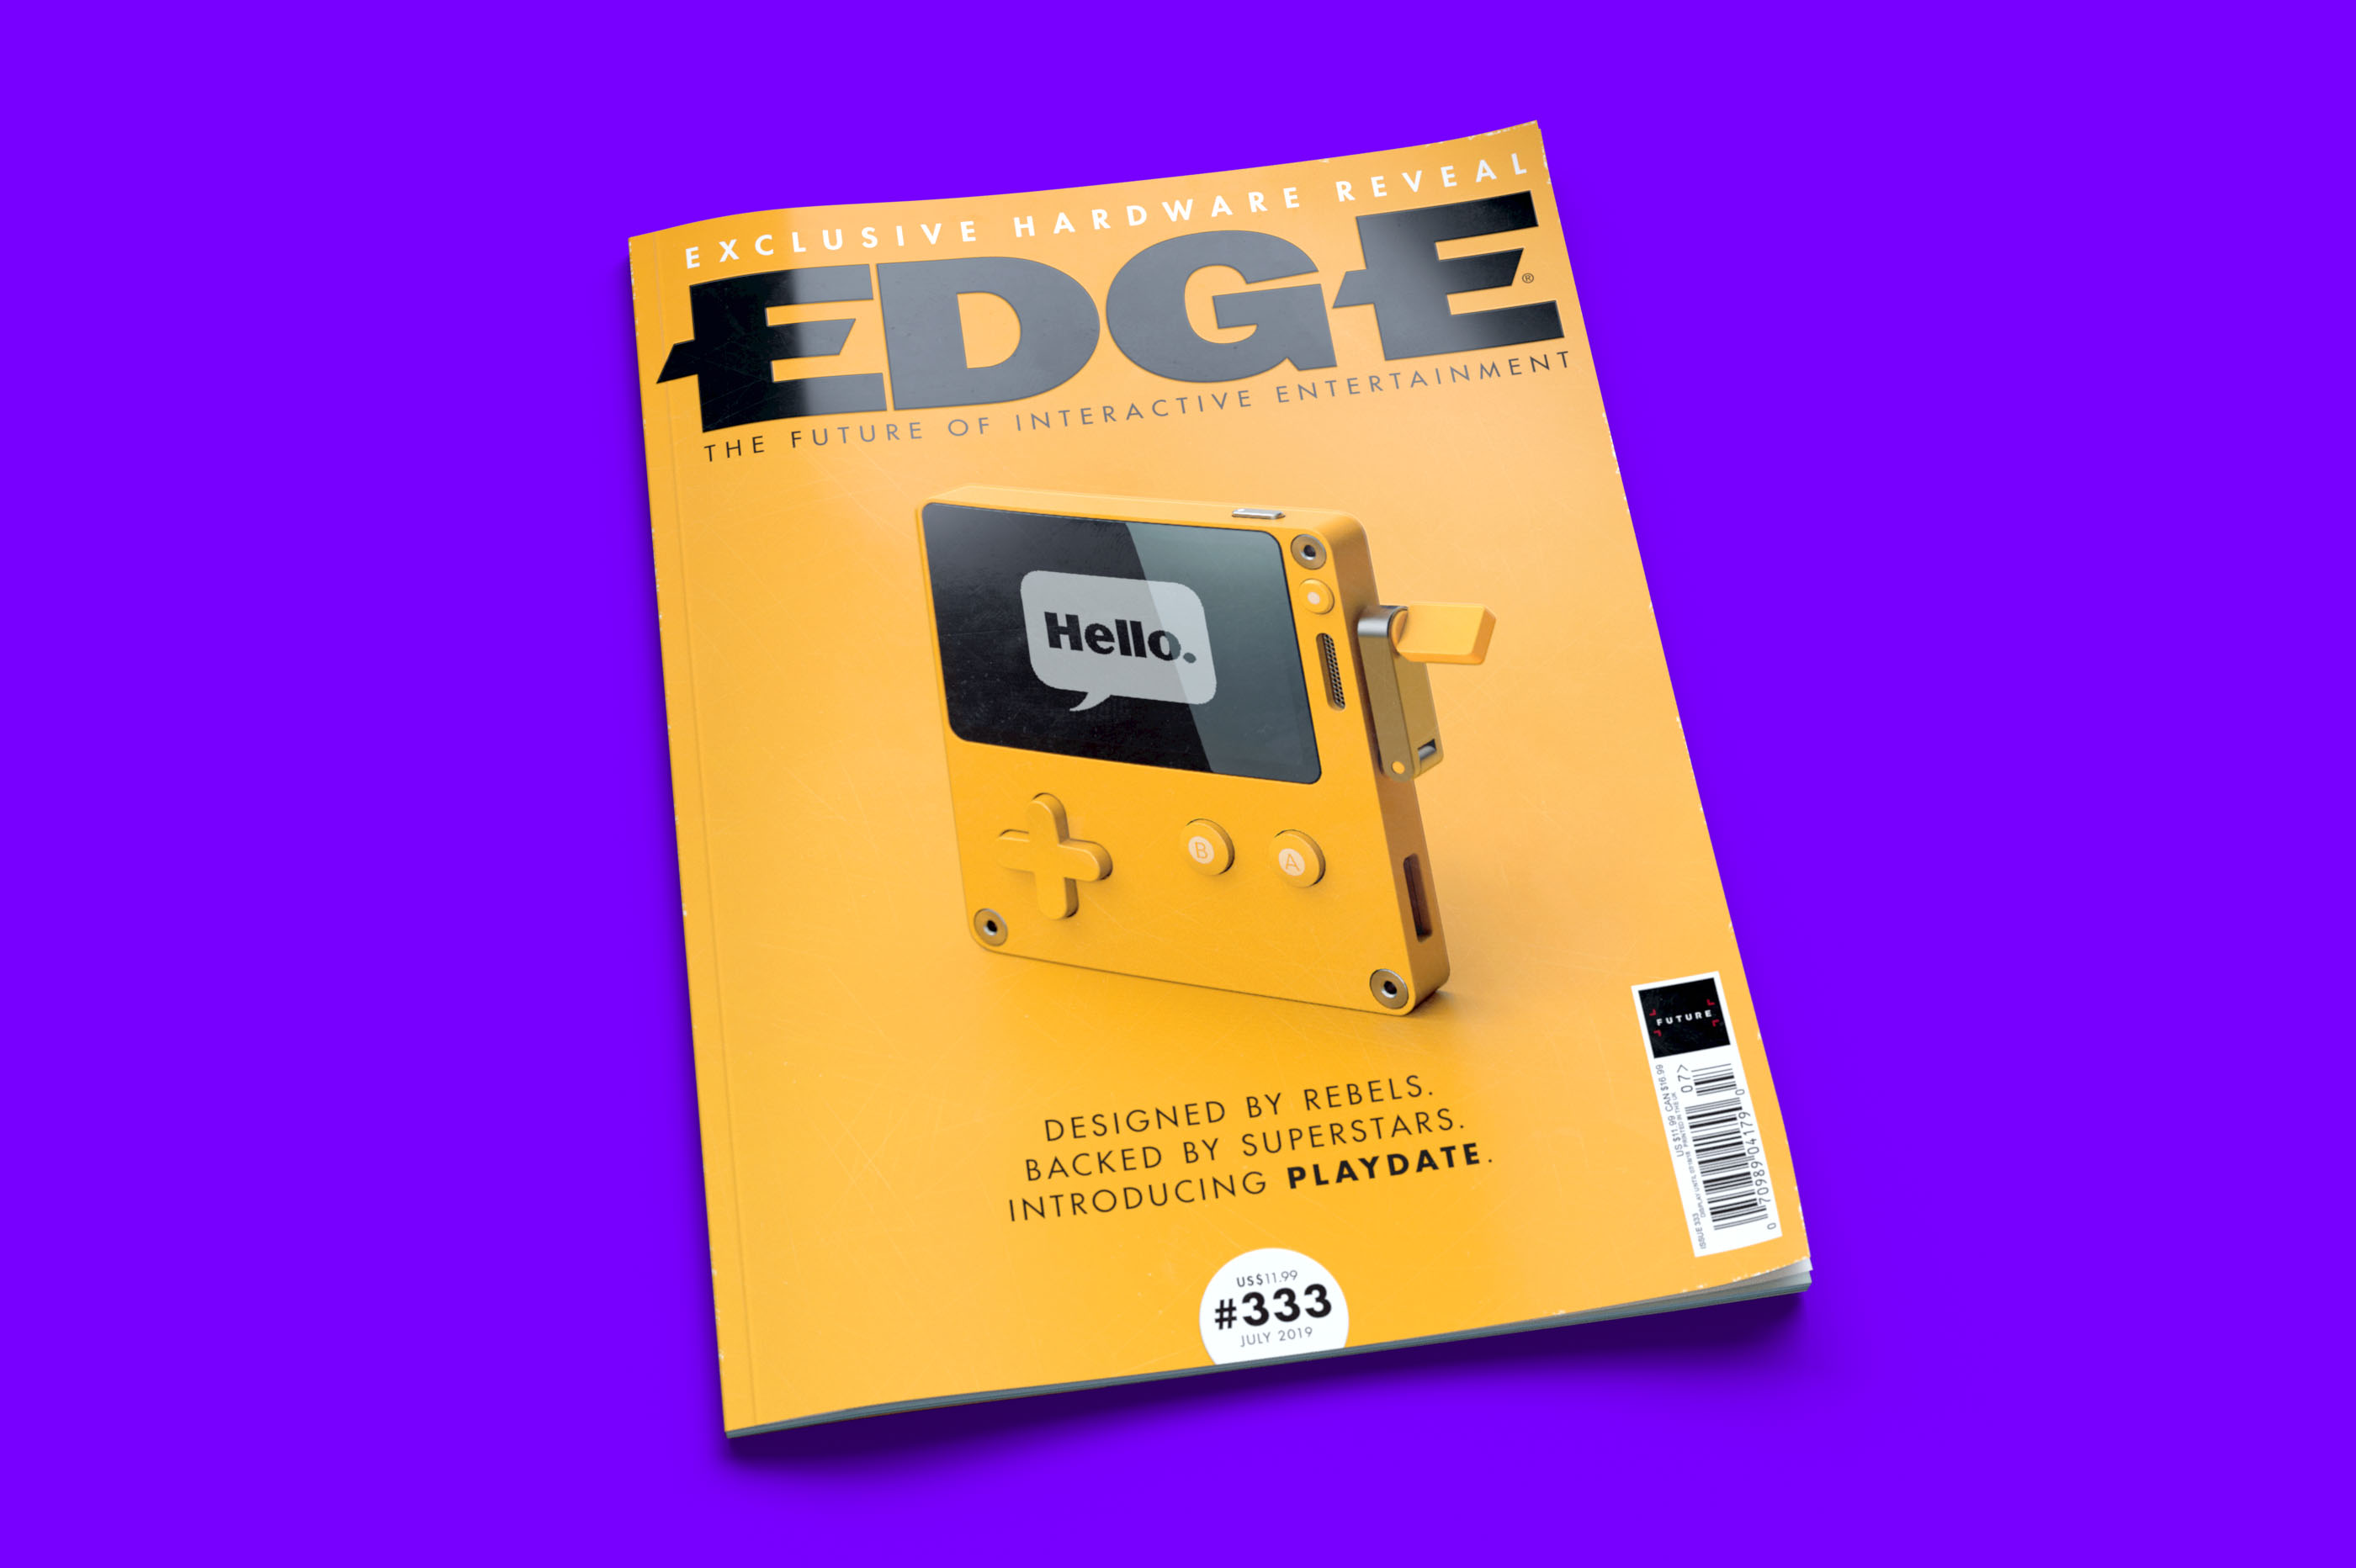 Issue 333 of Edge magazine will have more details about Playdate, including interviews with its creators.